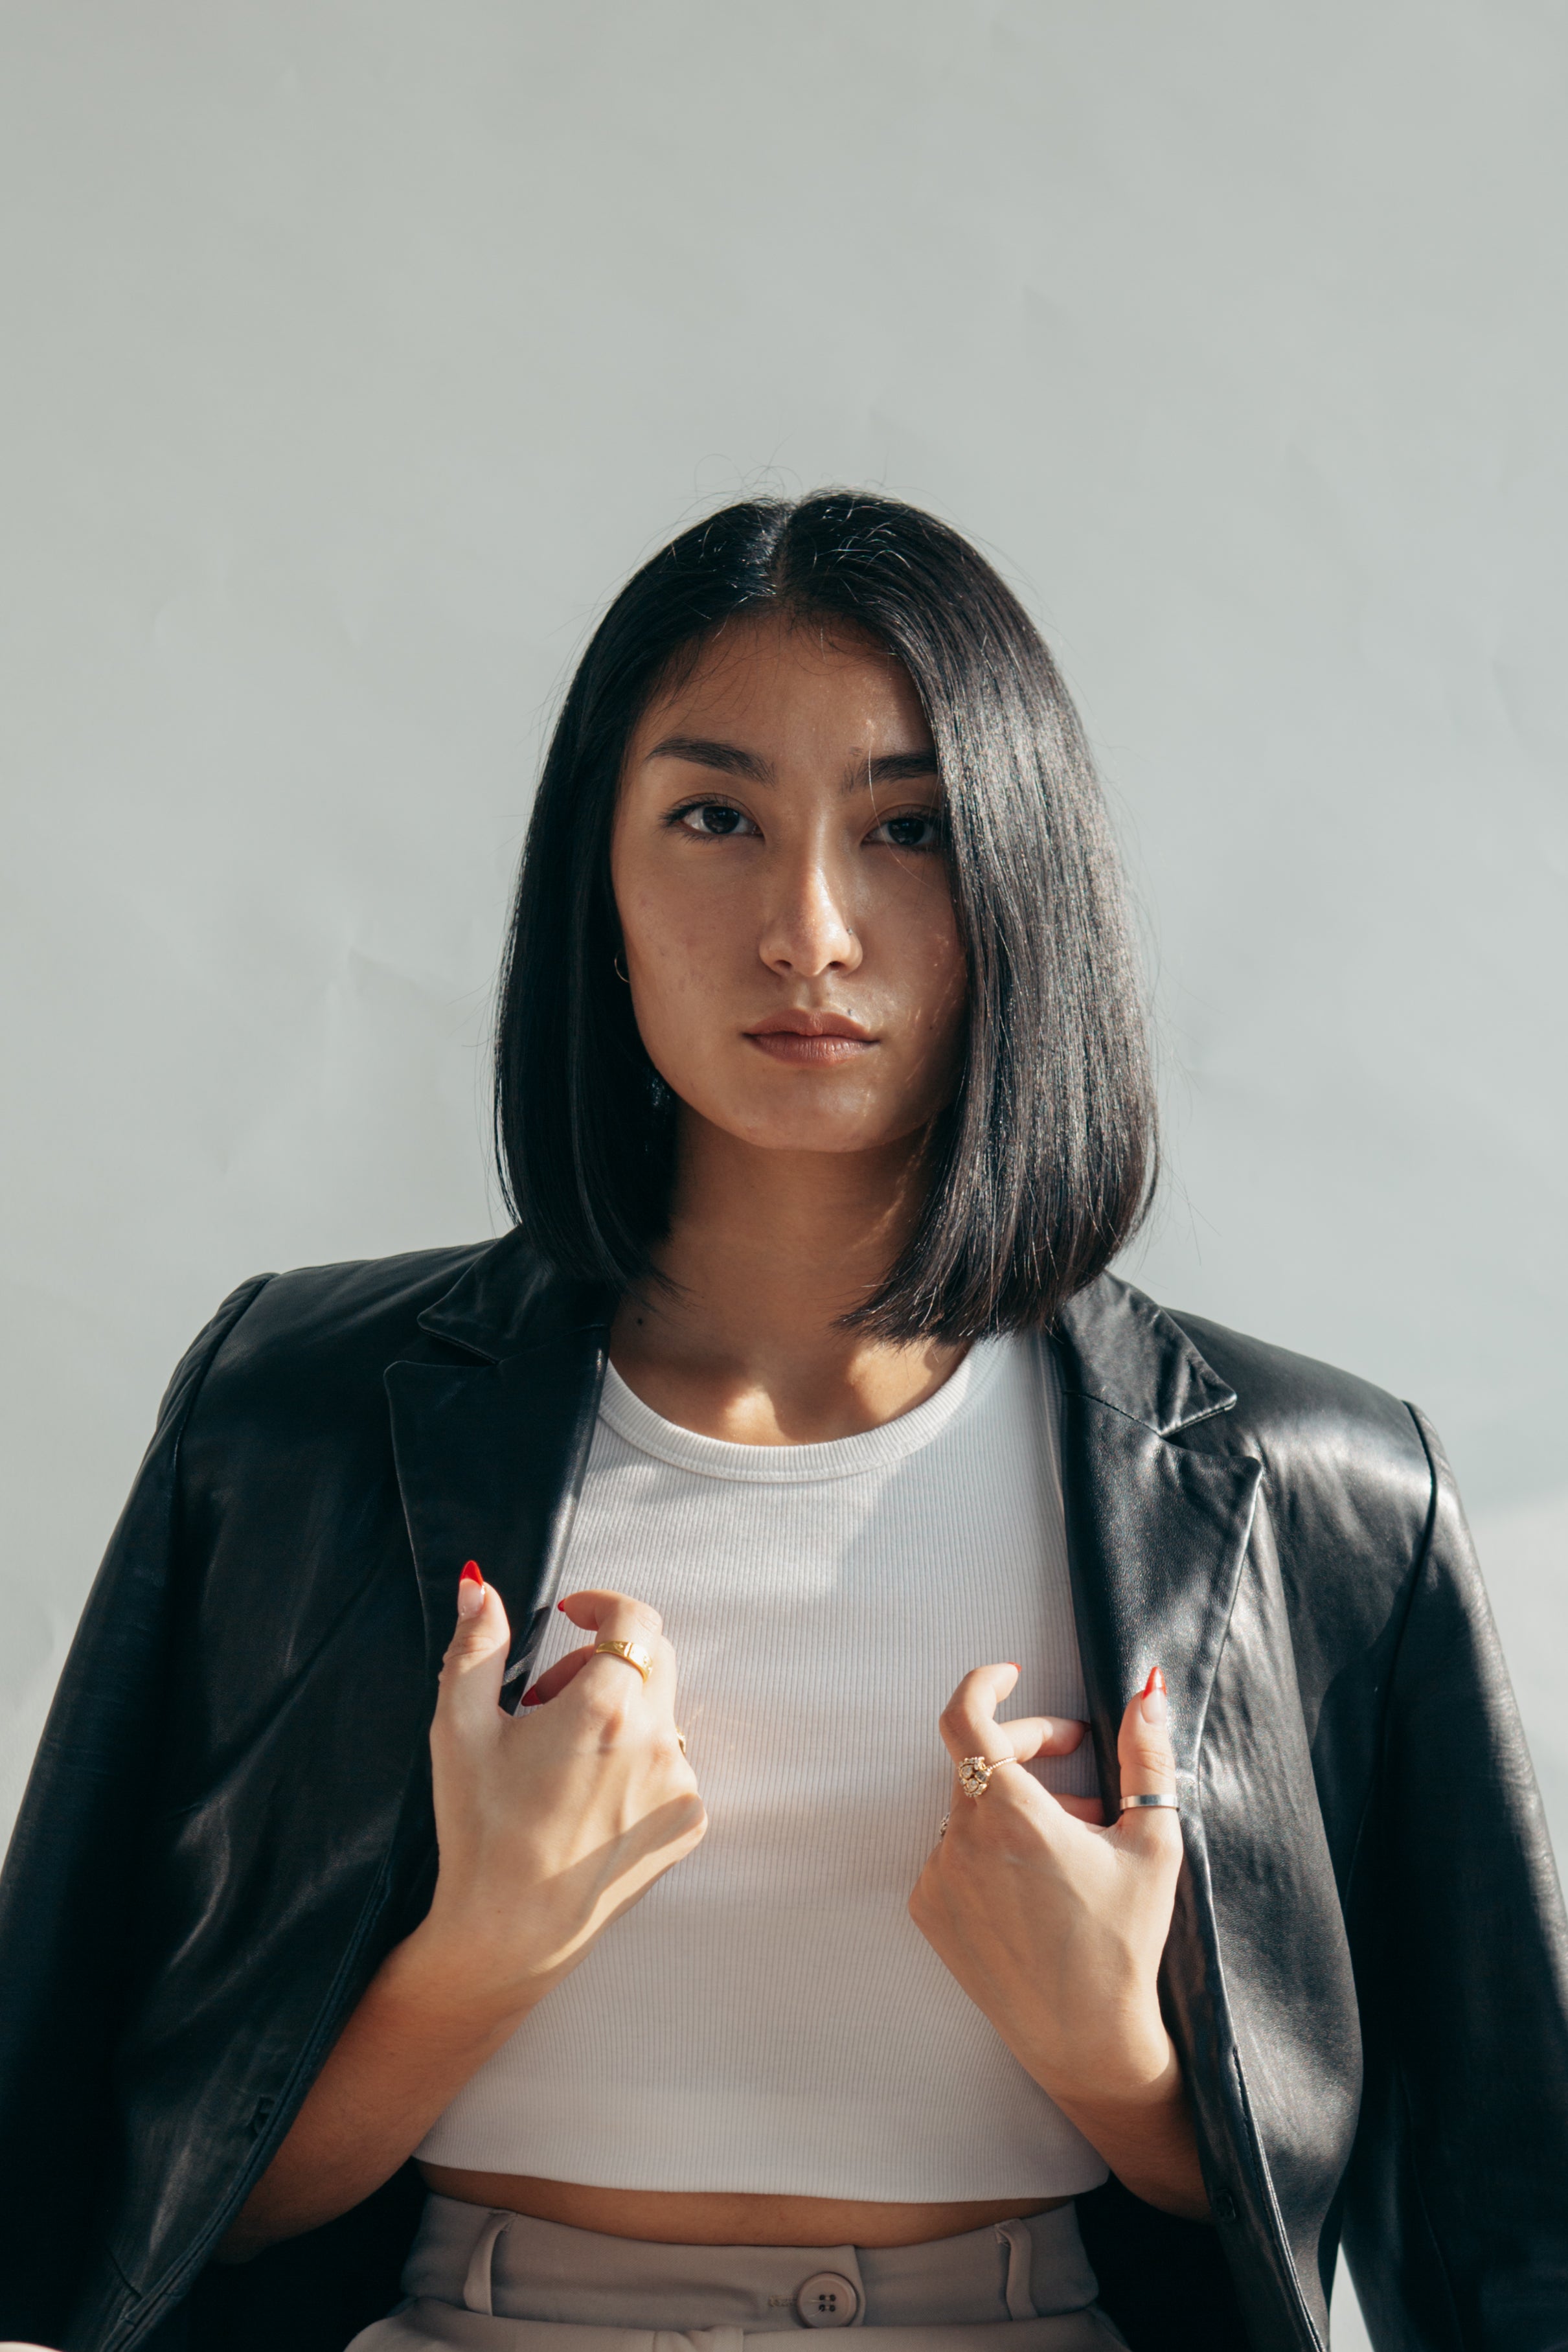 Confident woman in white top and black leather jacket with hands on collar